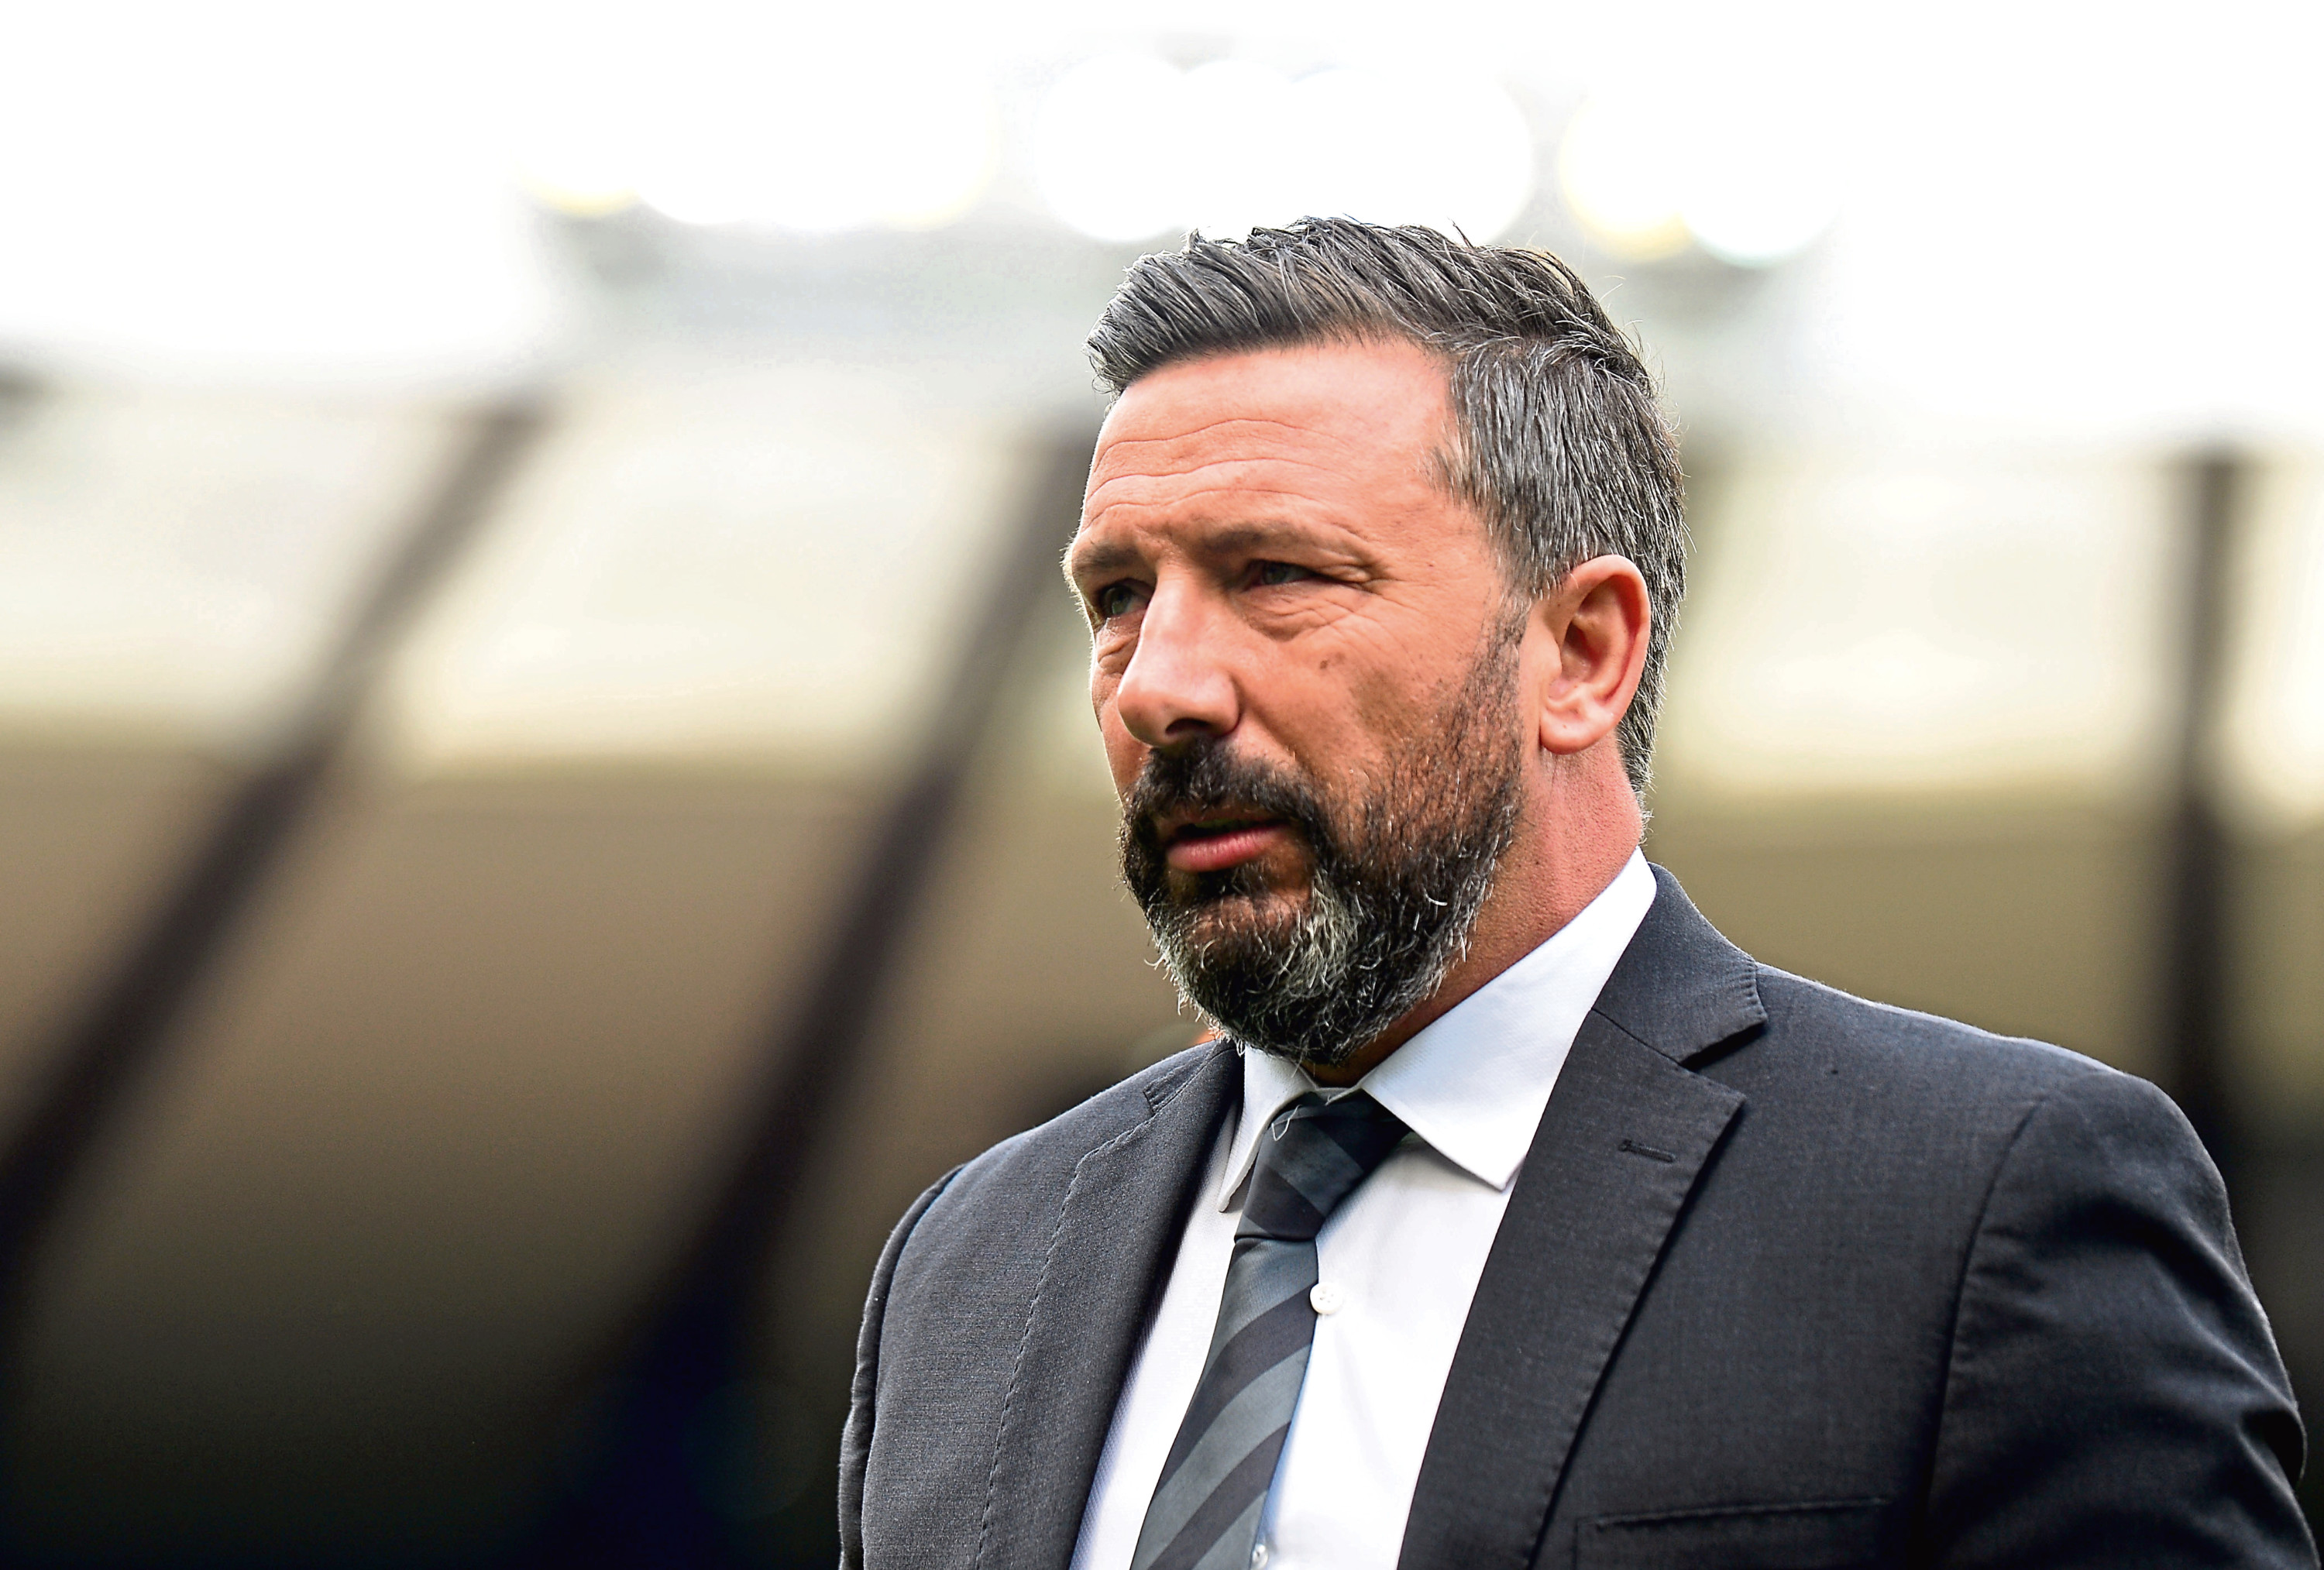 GLASGOW, SCOTLAND - APRIL 14:  Derek McInnes the manager of Aberdeen during the Scottish Cup semi-final between Aberdeen and Celtic at Hampden Park on April 14, 2019 in Glasgow, Scotland. (Photo by Mark Runnacles/Getty Images)